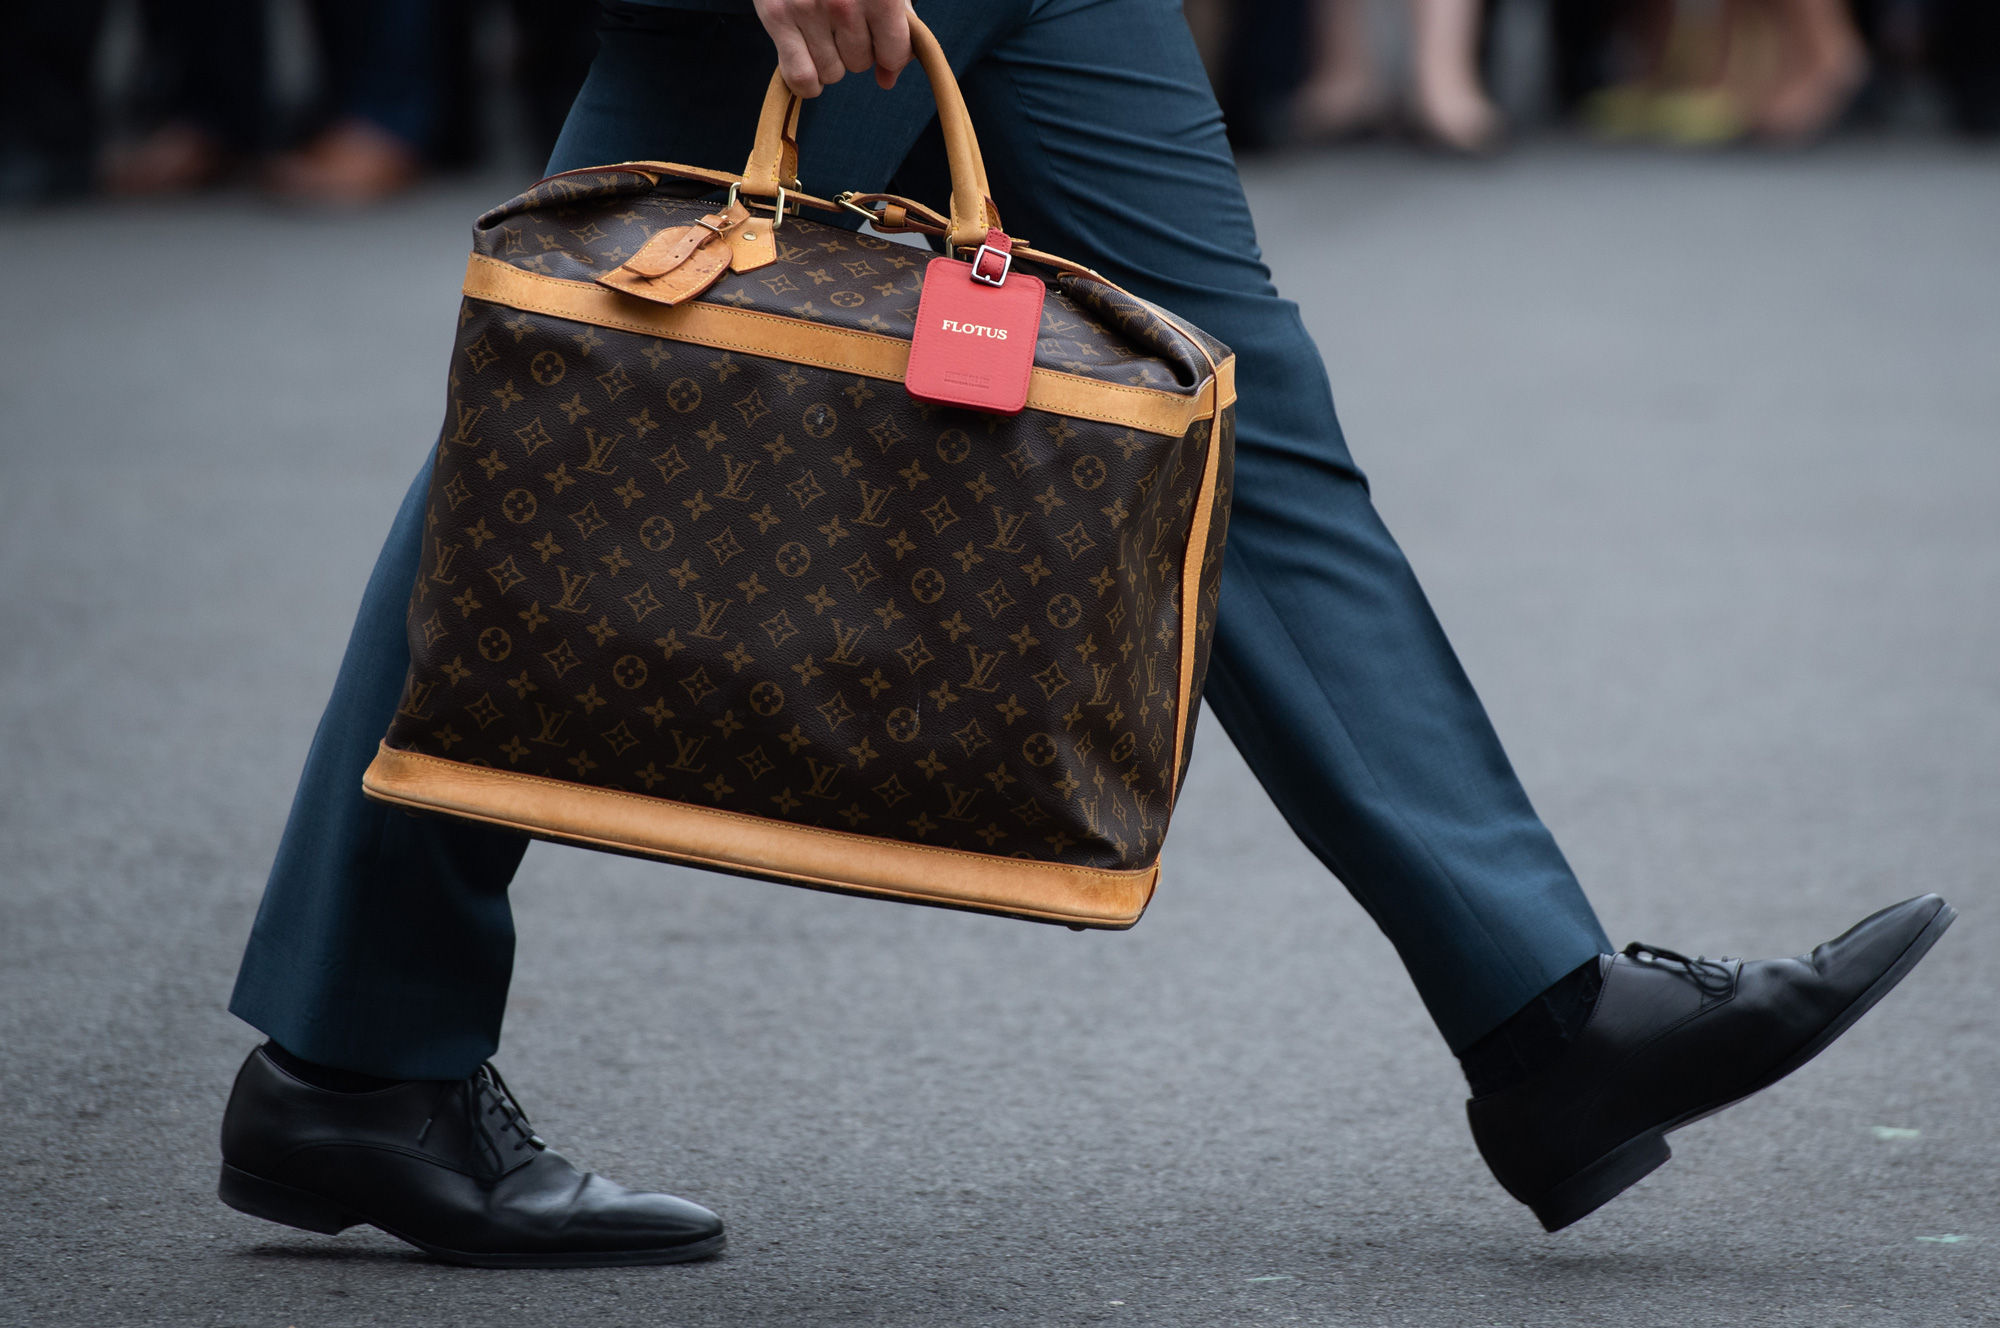 These are the 10 most searched-for designer products in the world